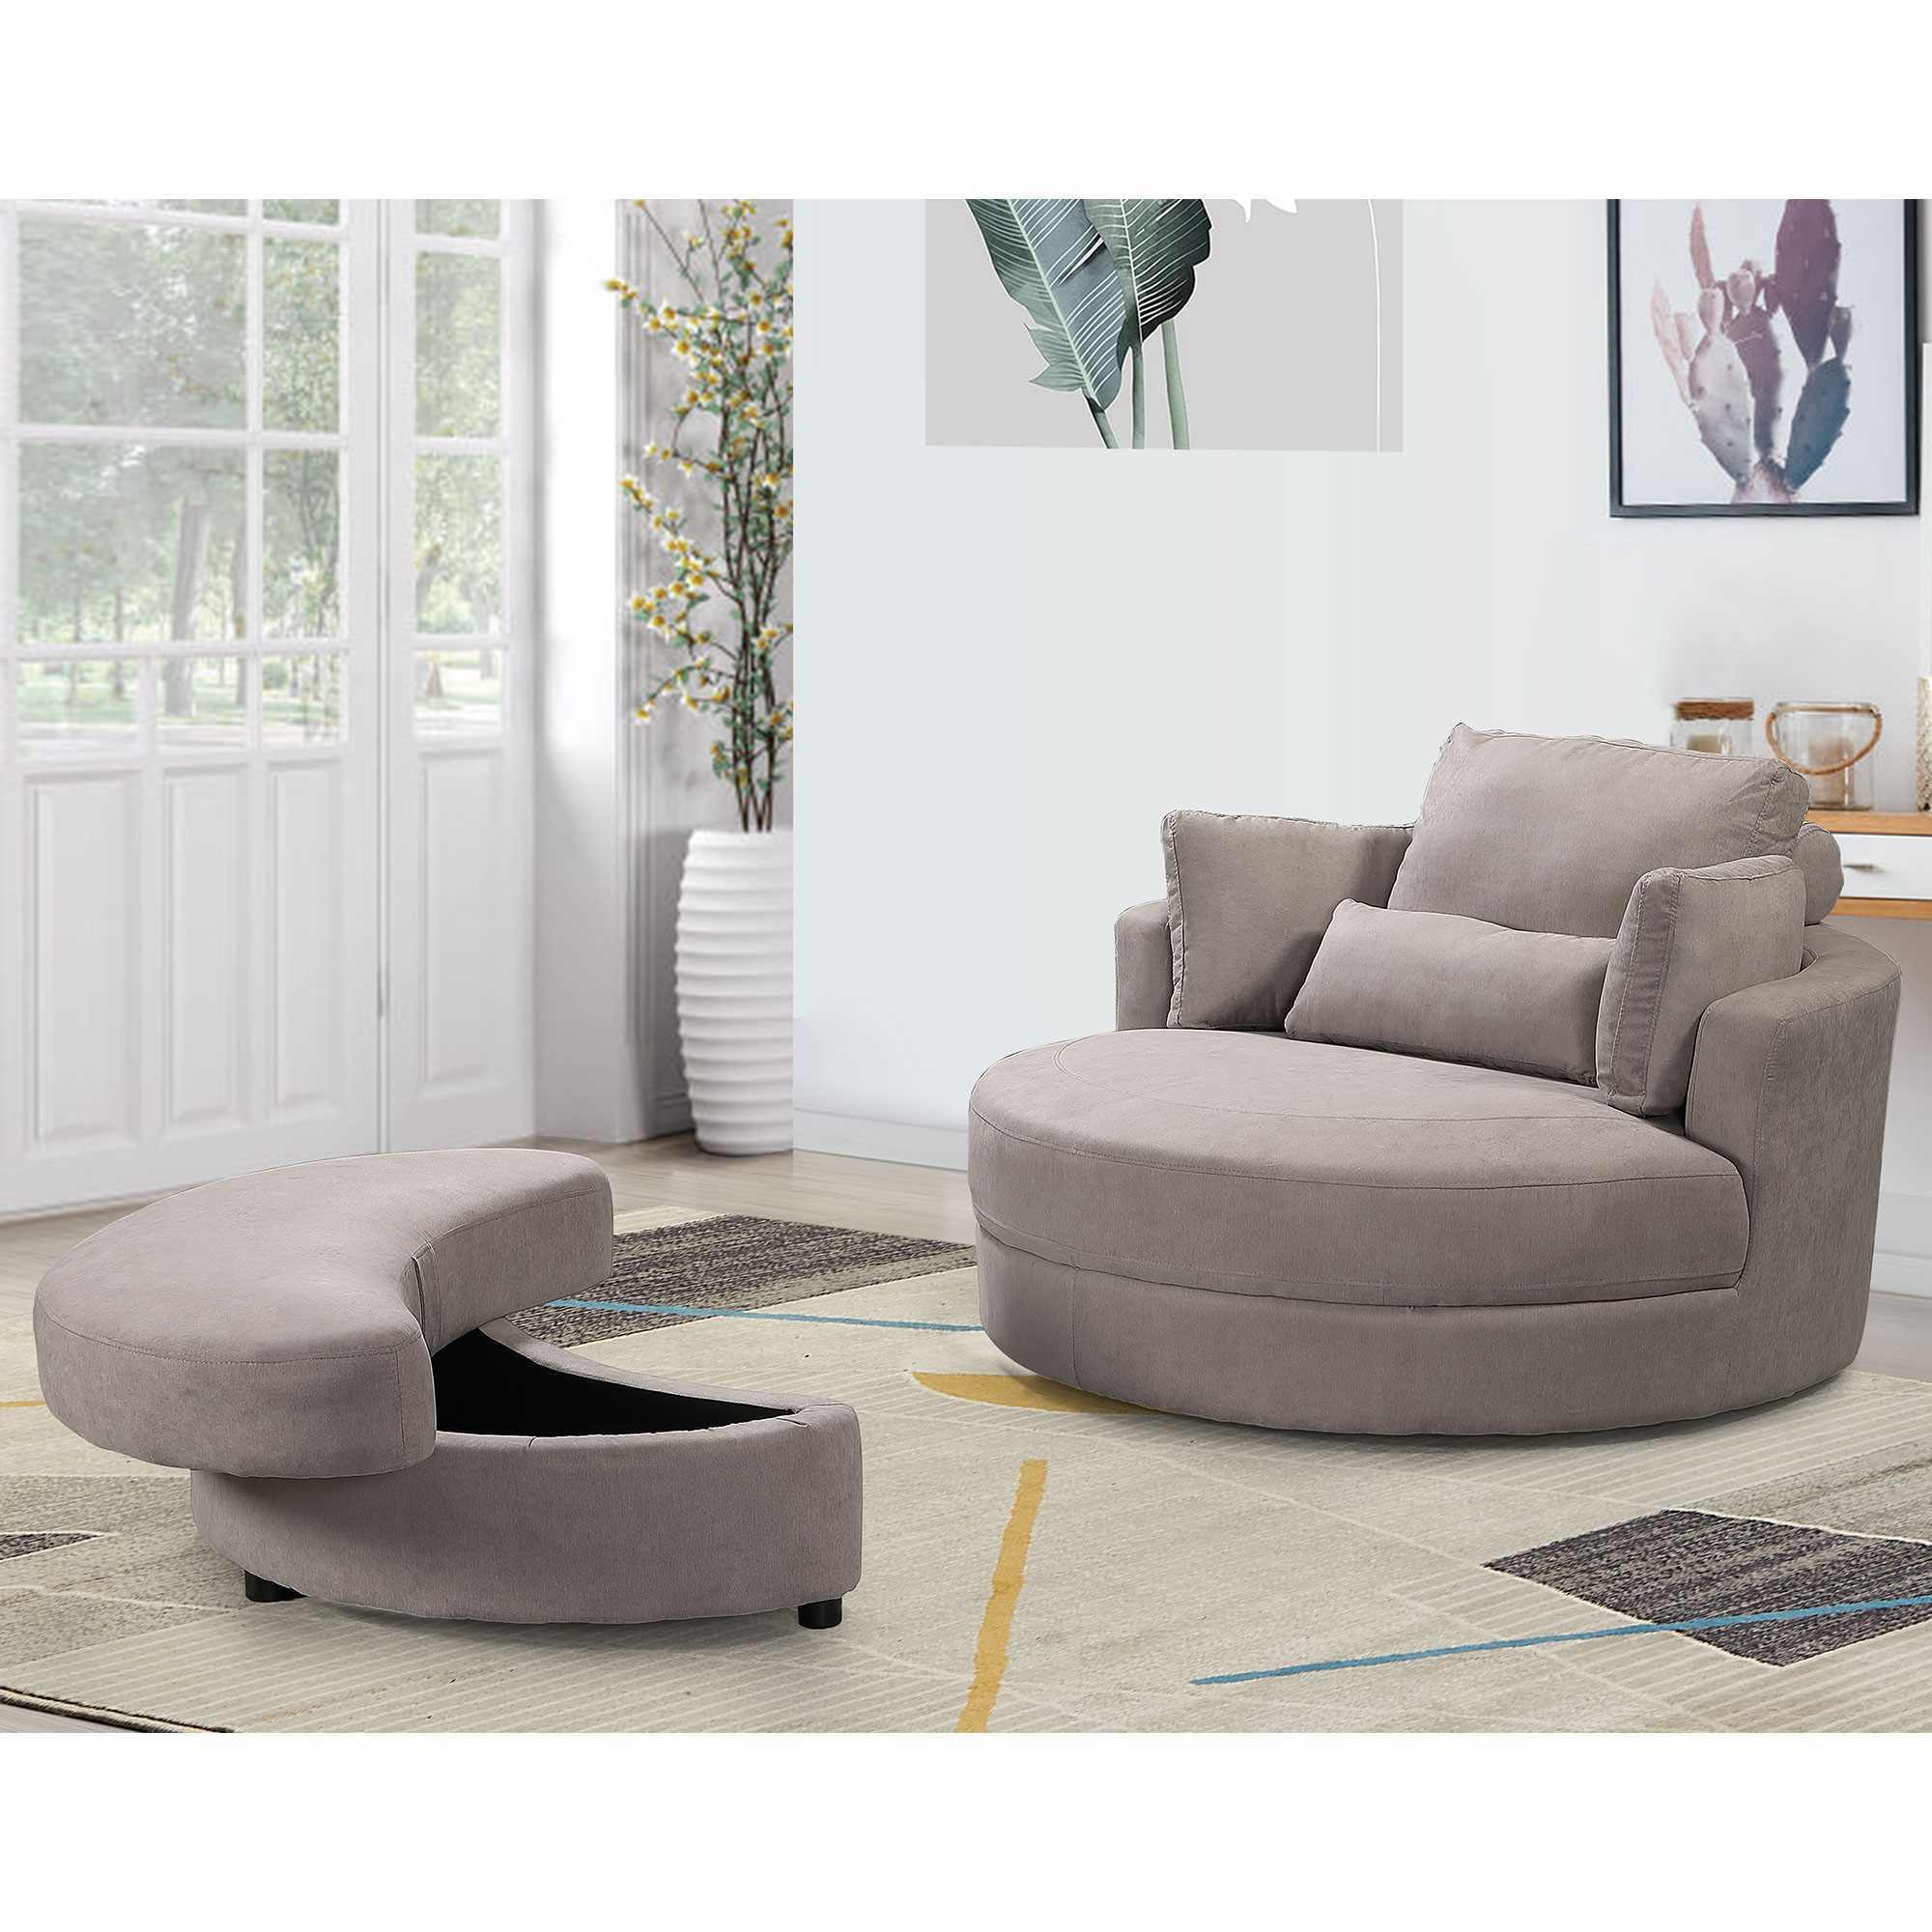 Welike Swivel Accent Barrel Modern Grey Sofa Lounge Club Big Round Chair with Storage Ottoman Linen Fabric for Living Room Hotel with Pillows-Boyel Living